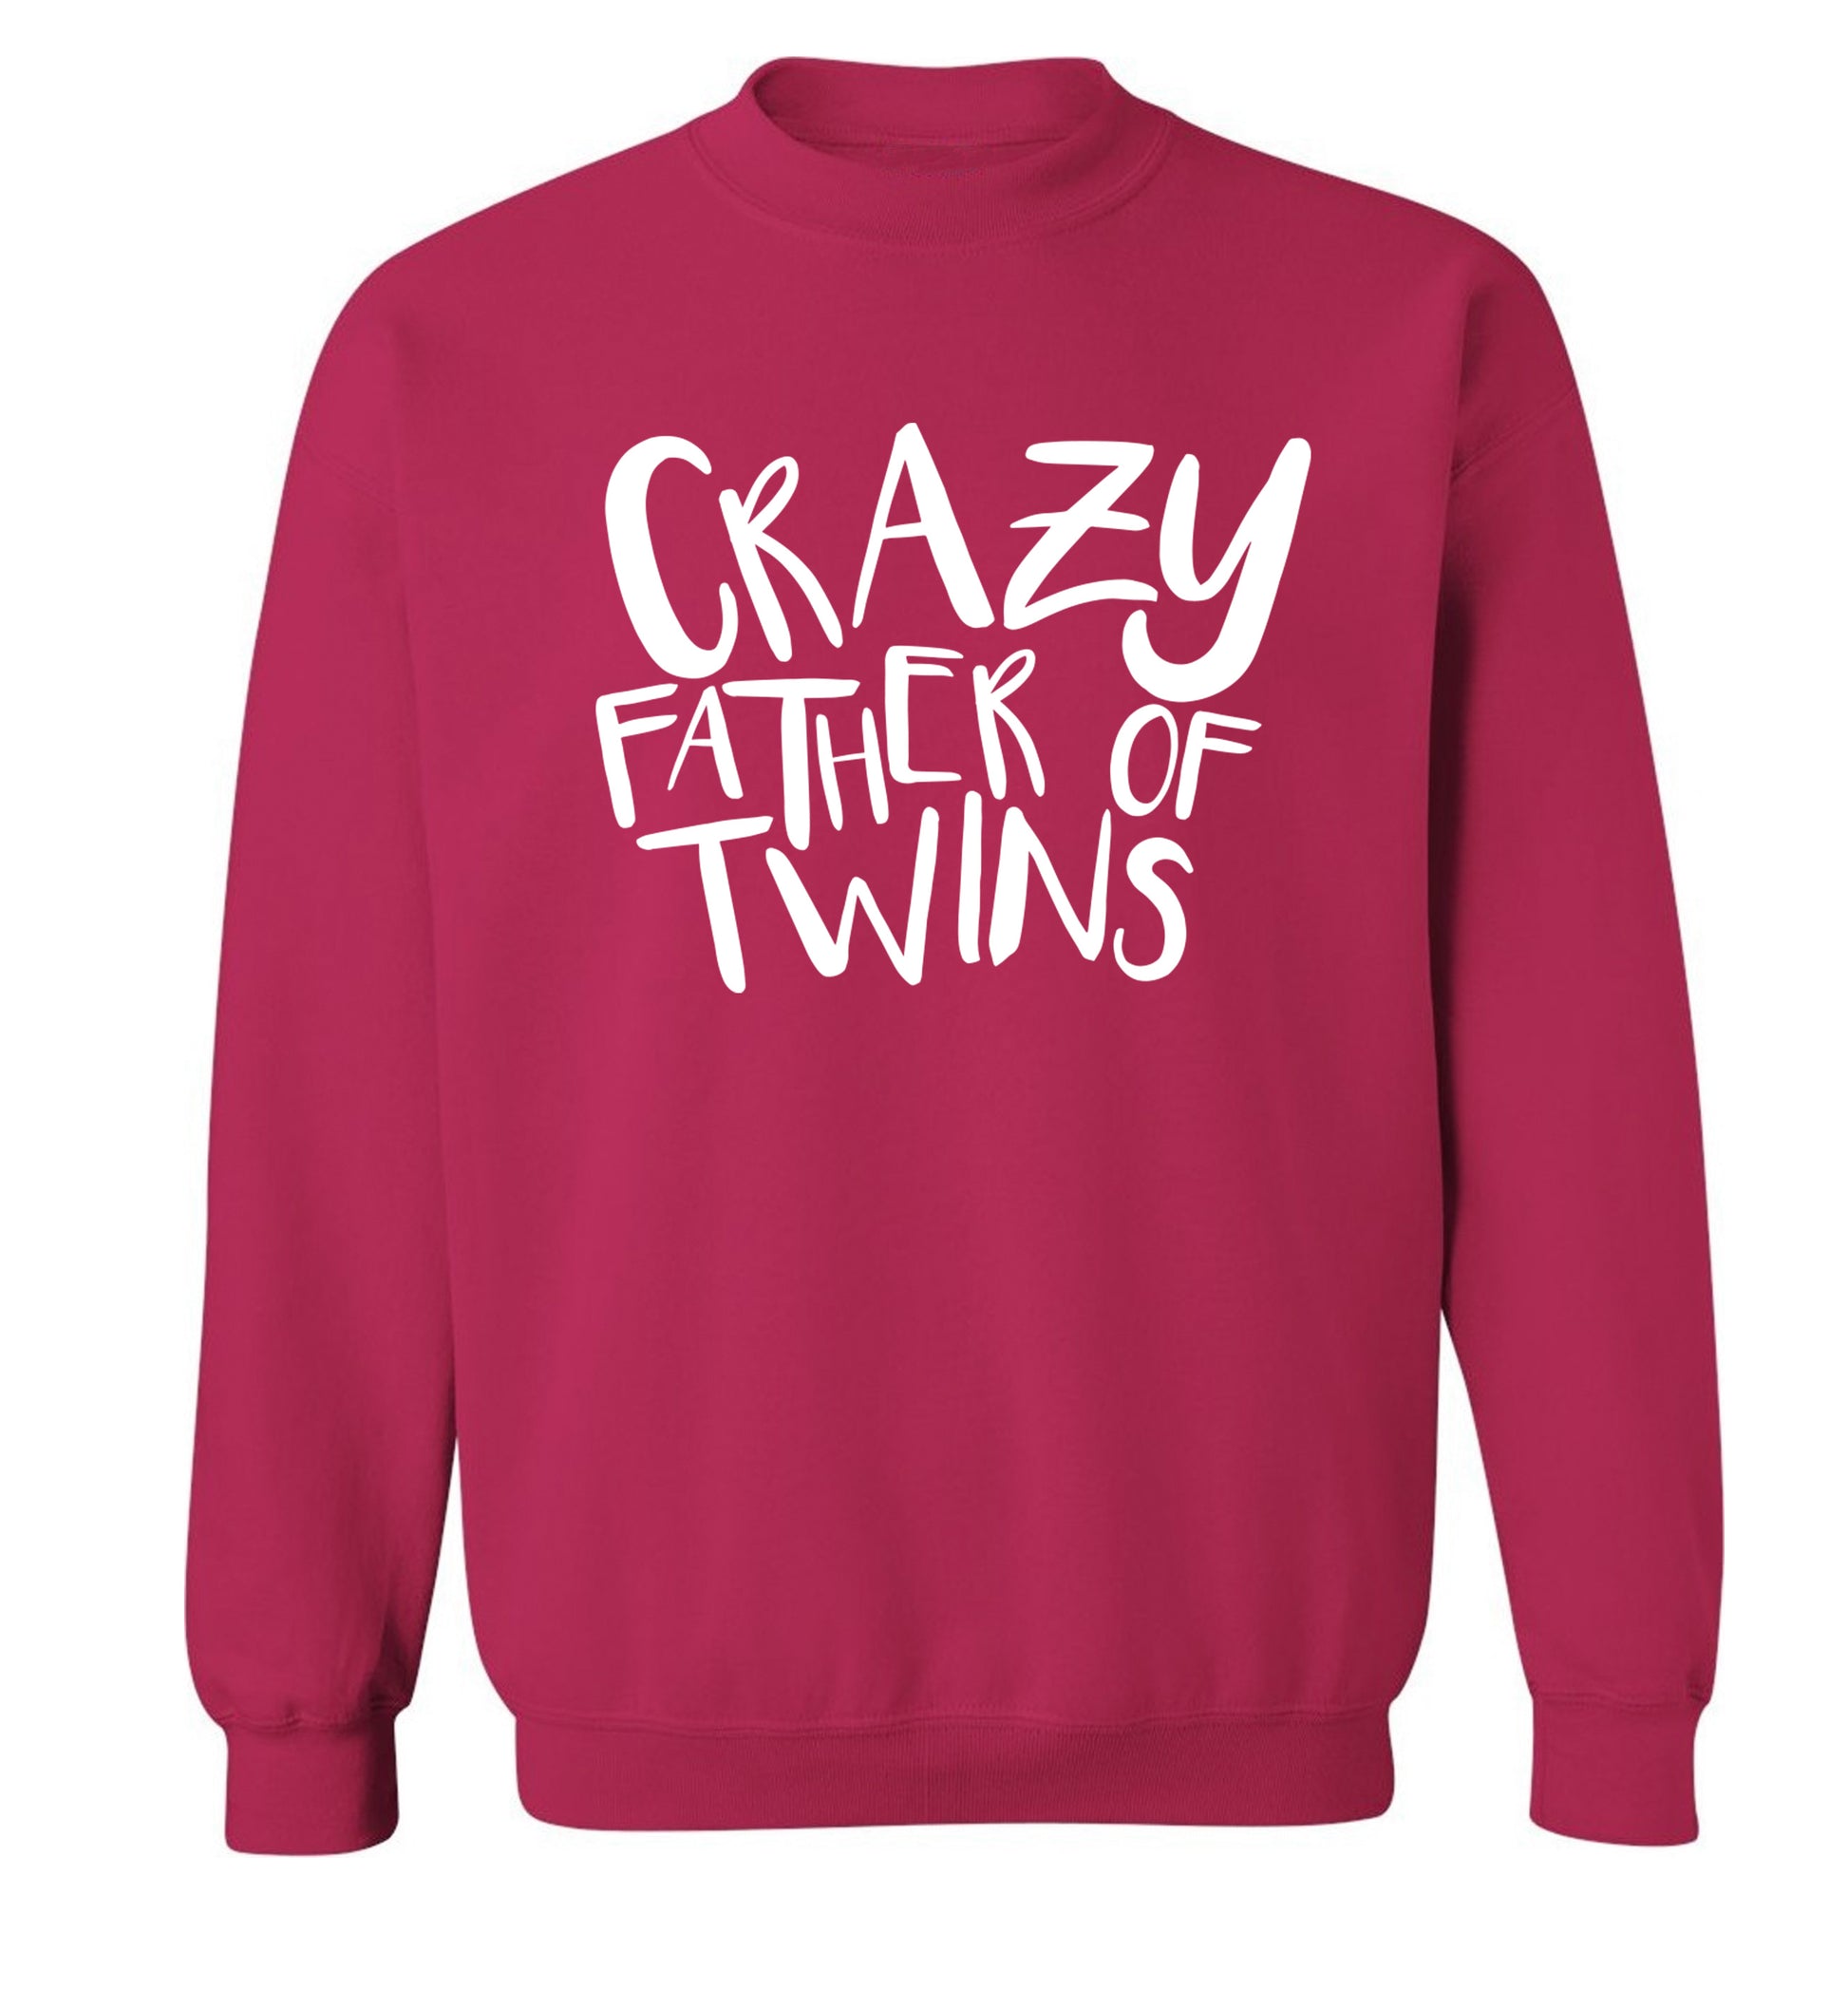 Crazy father of twins Adult's unisex pink Sweater 2XL